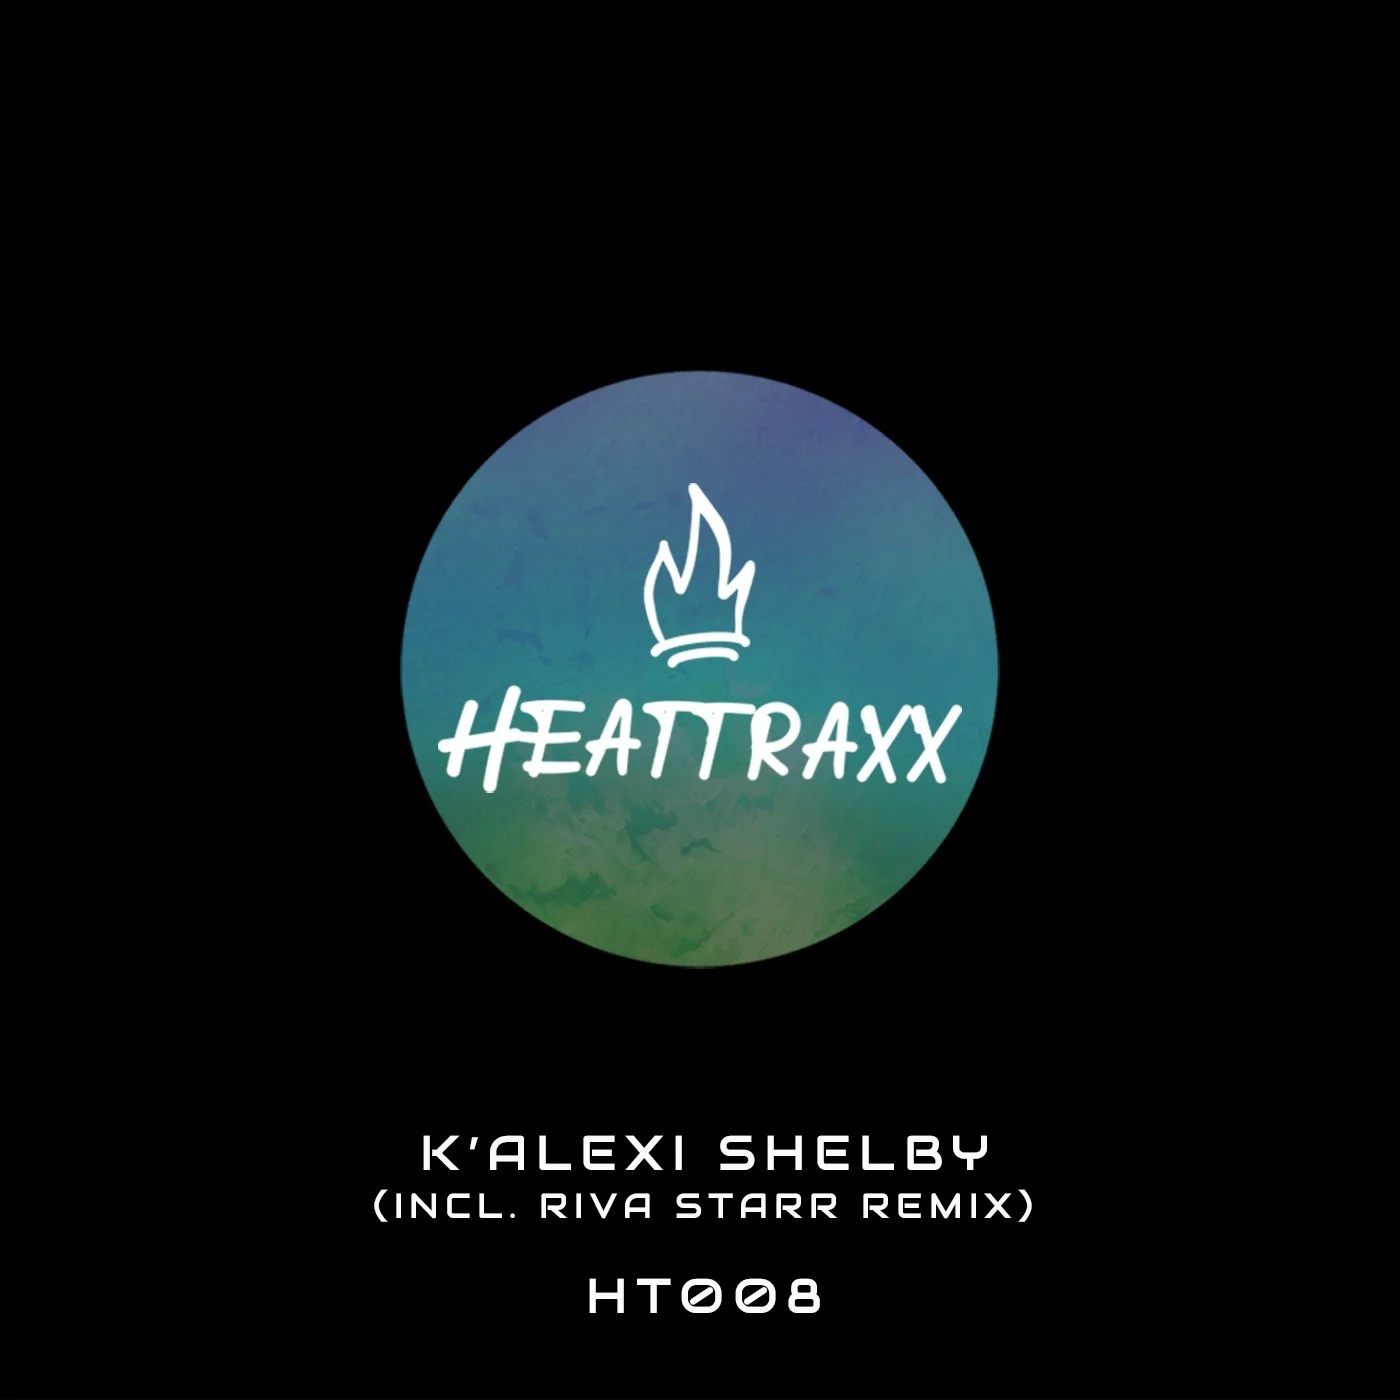 K'Alexi Shelby - The Ron Hardy Memo (Riva Starr Remix)